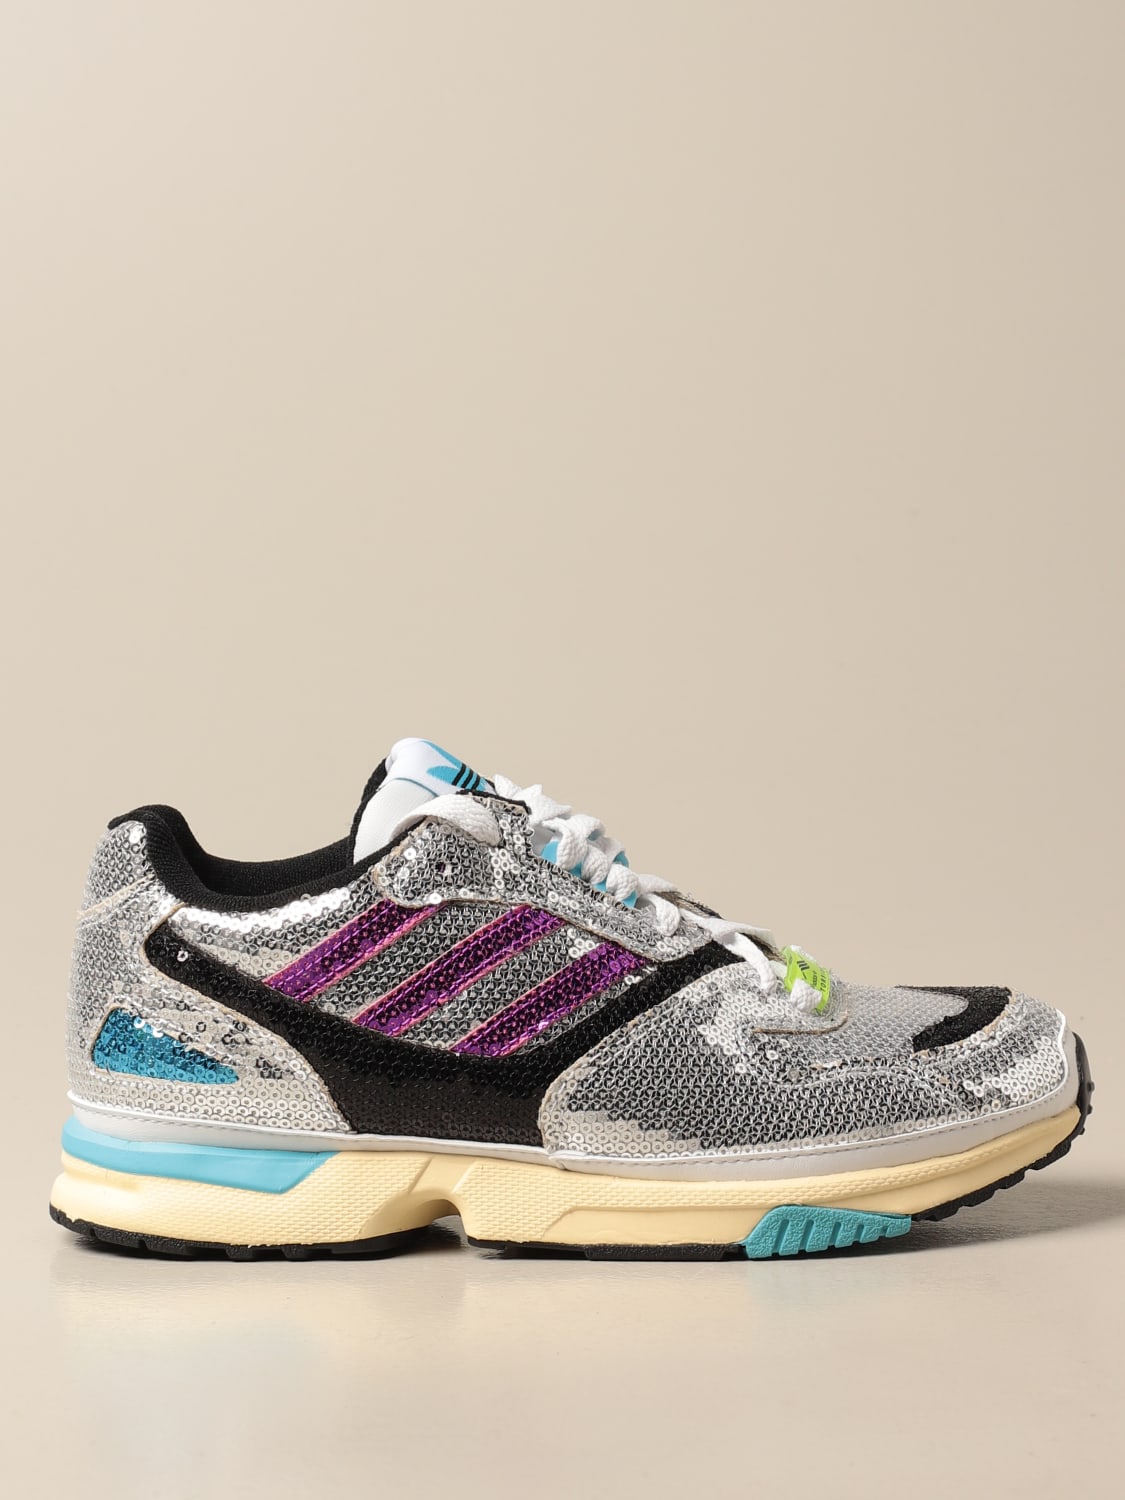 Zx 4000 W Adidas Originals sneakers with sequins